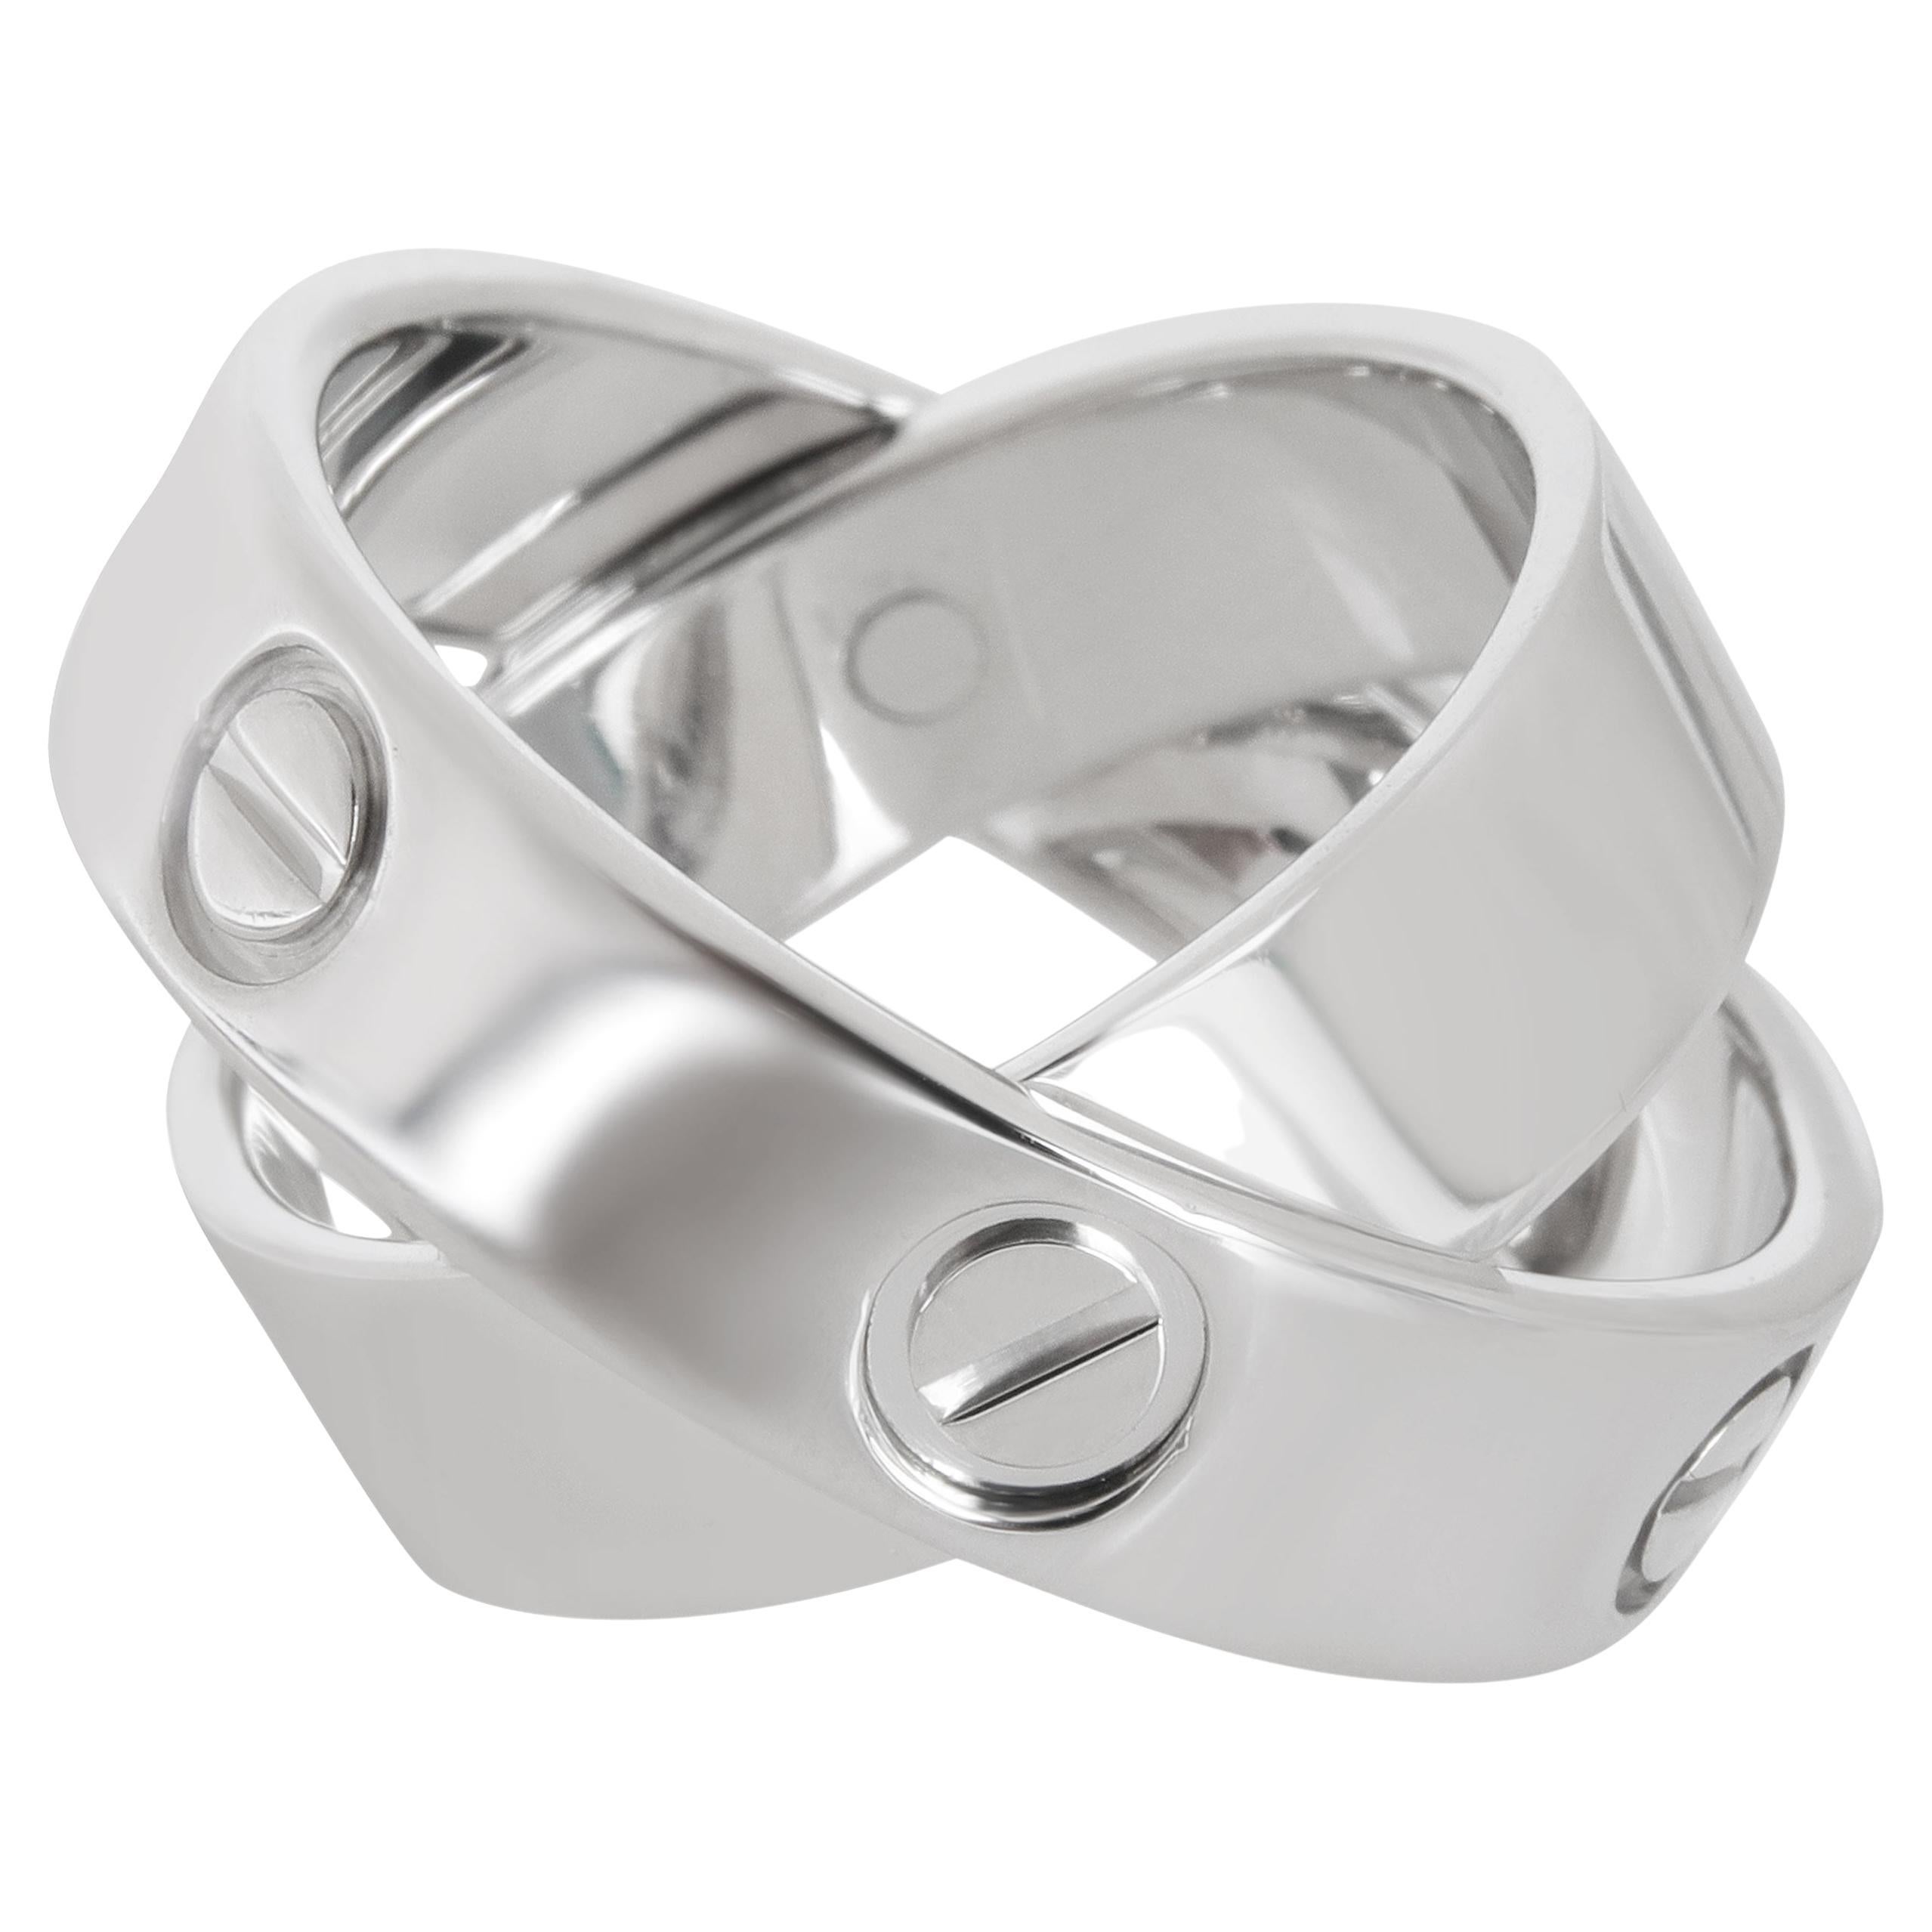 Cartier Love Ring in 18K White Gold